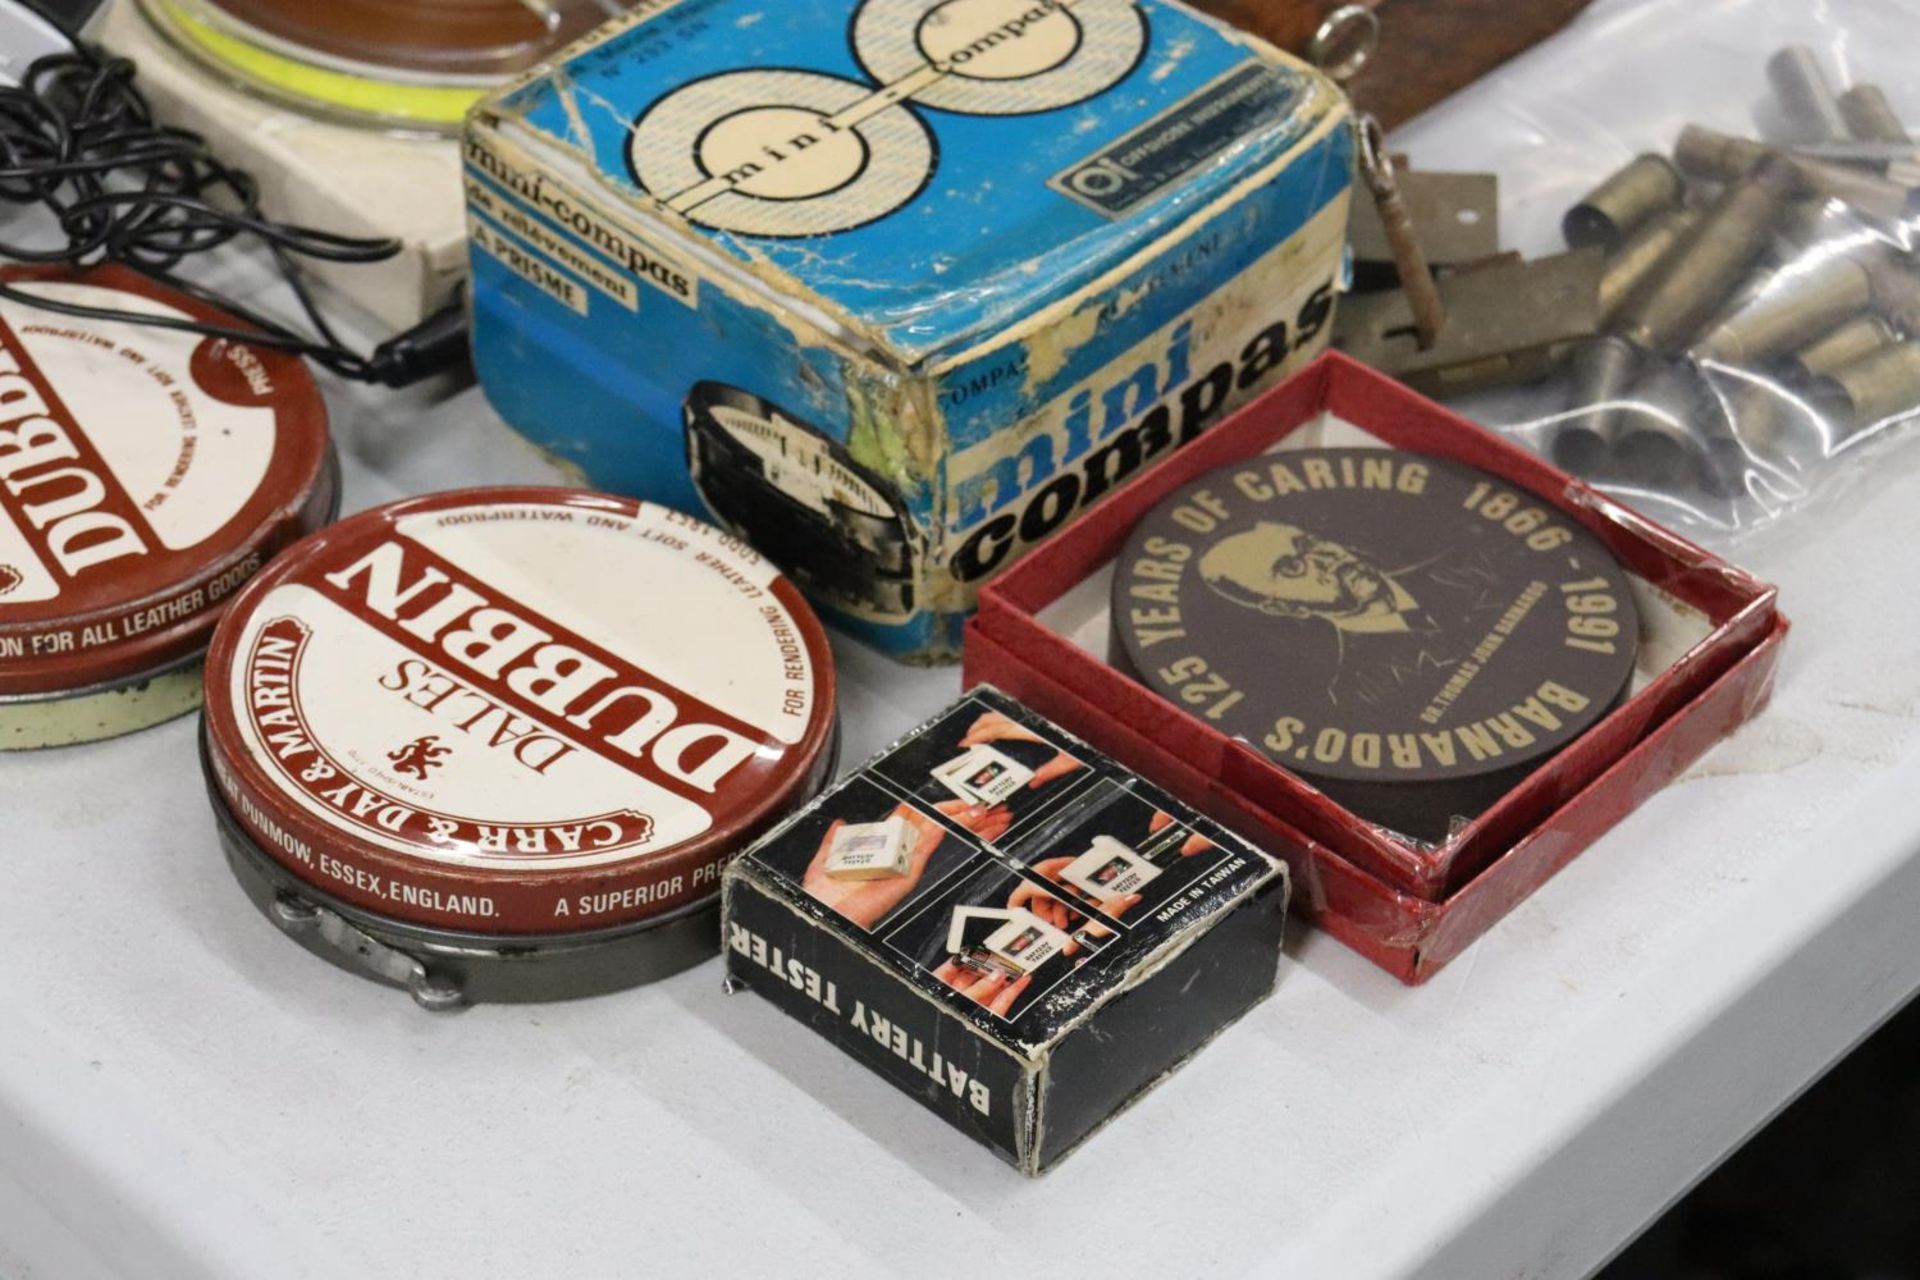 A MIXED VINTAGE LOT TO INCLUDE AN AA BADGE, DESK CALENDAR, 'MINI-COMPAS', LOCKS, GAVEL, TINS, ETC - Image 2 of 8